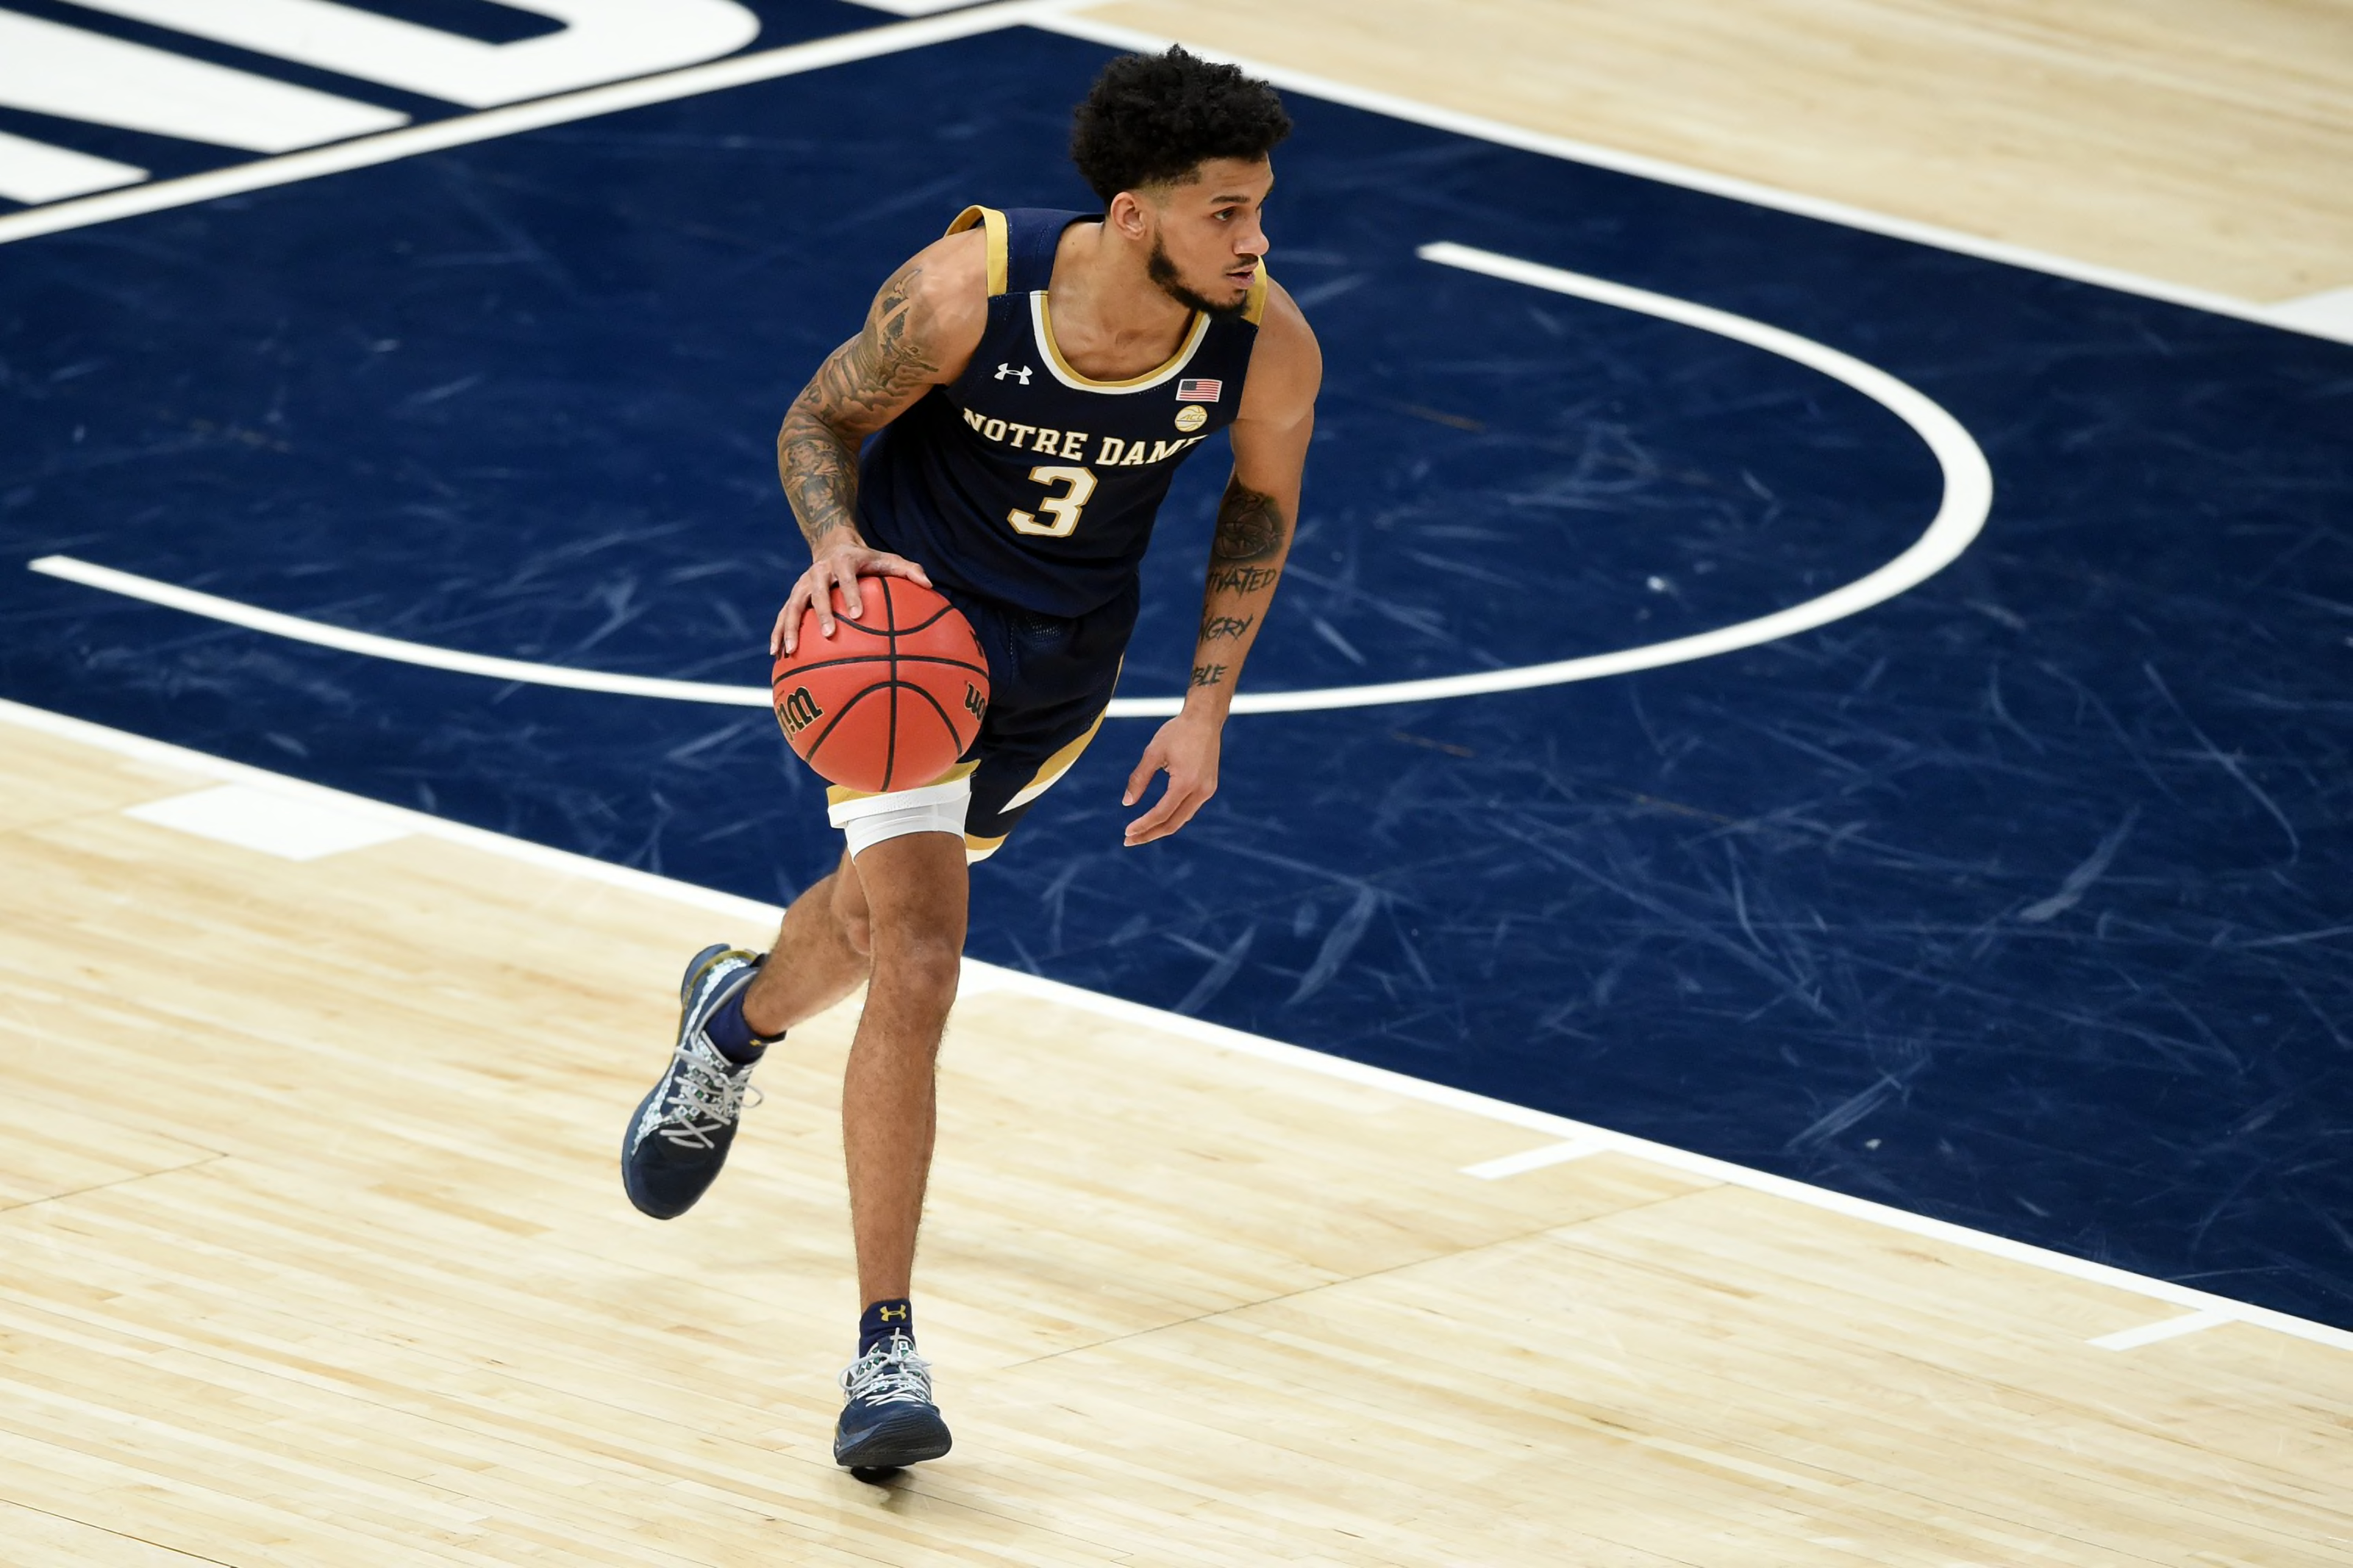 Notre Dame Basketball: Projected starting lineup, depth chart for 2021-22